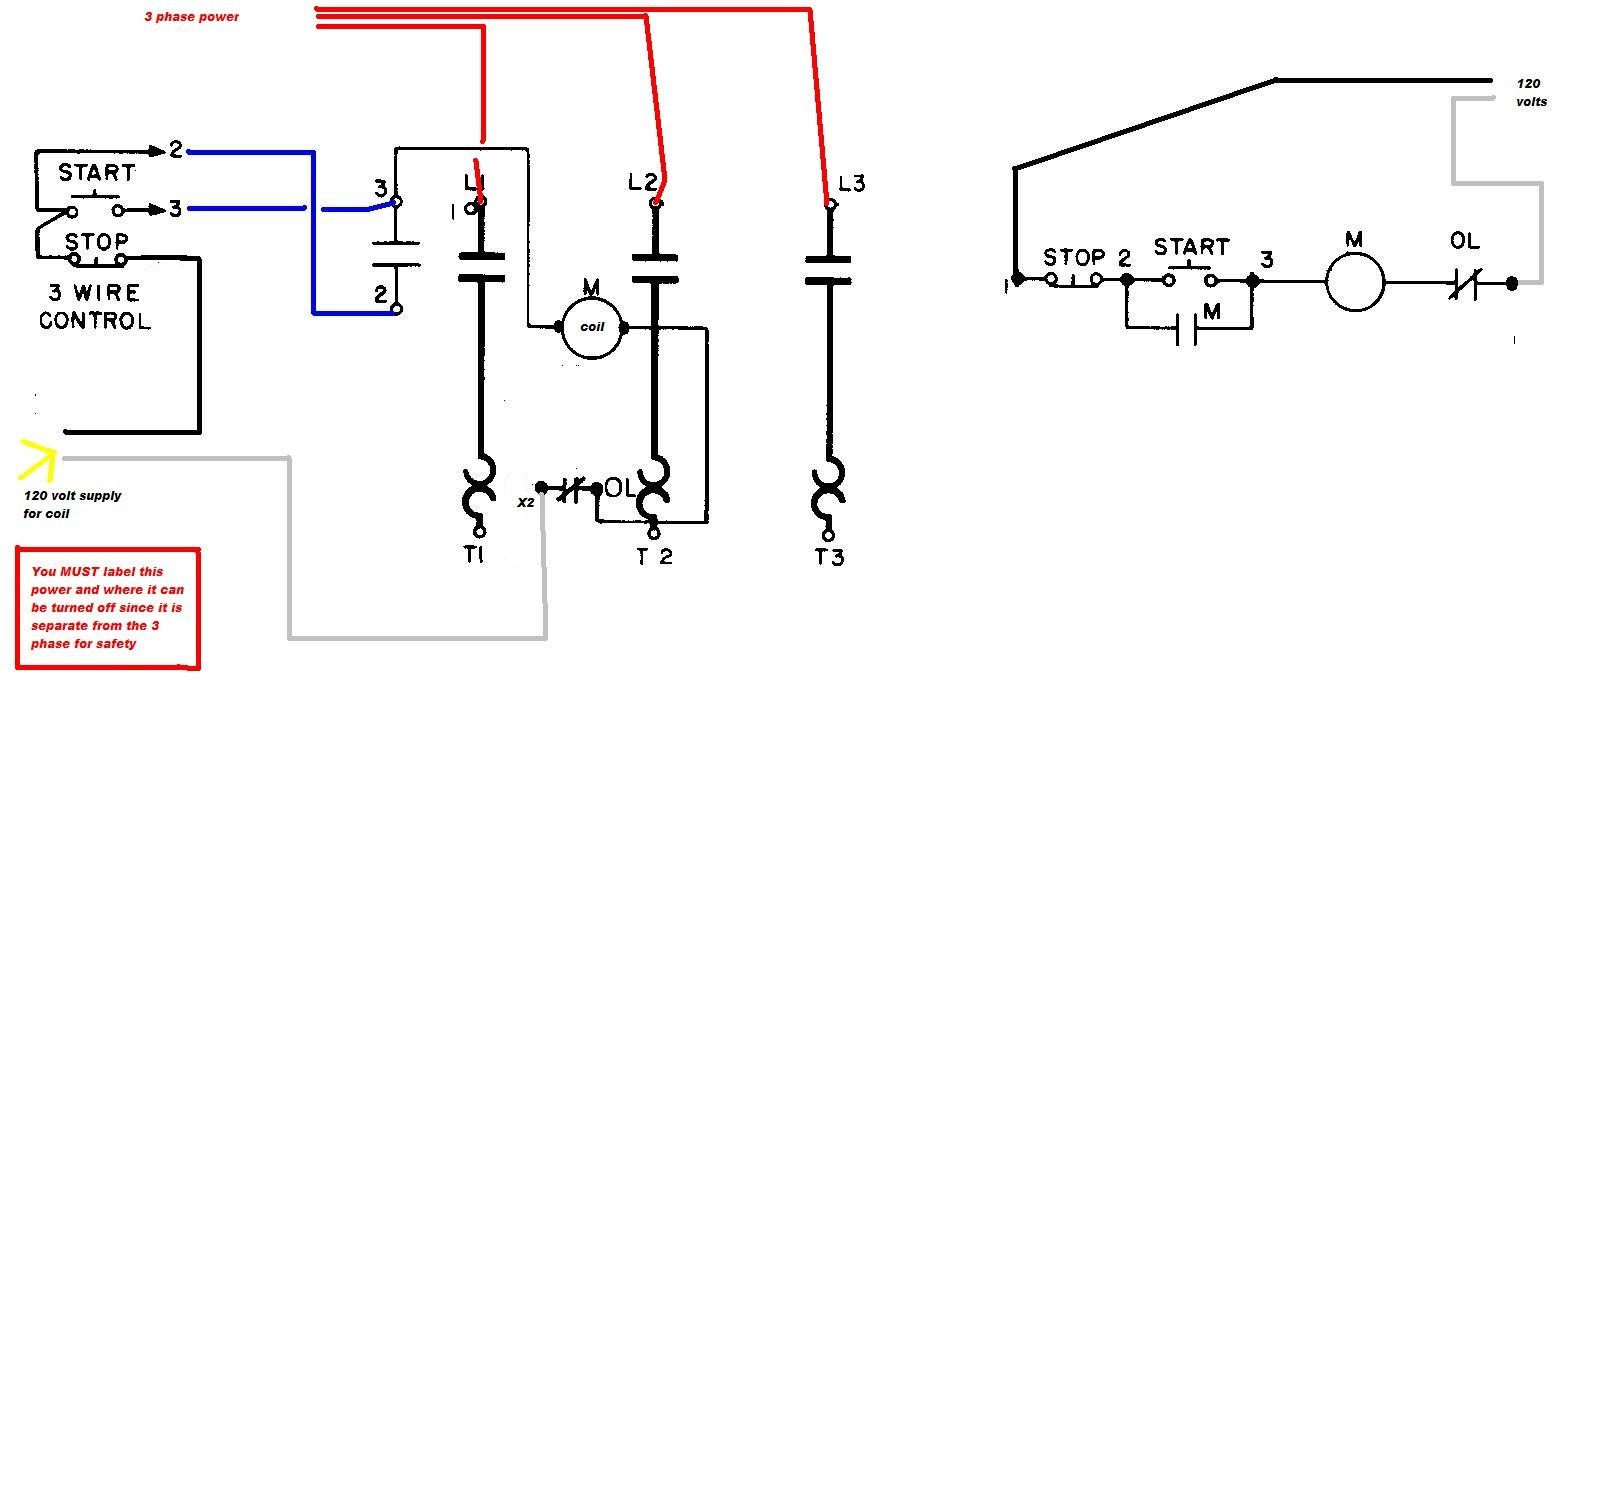 3 Phase Start Stop Wiring Diagram Fresh I Have A Square D 8536 240v